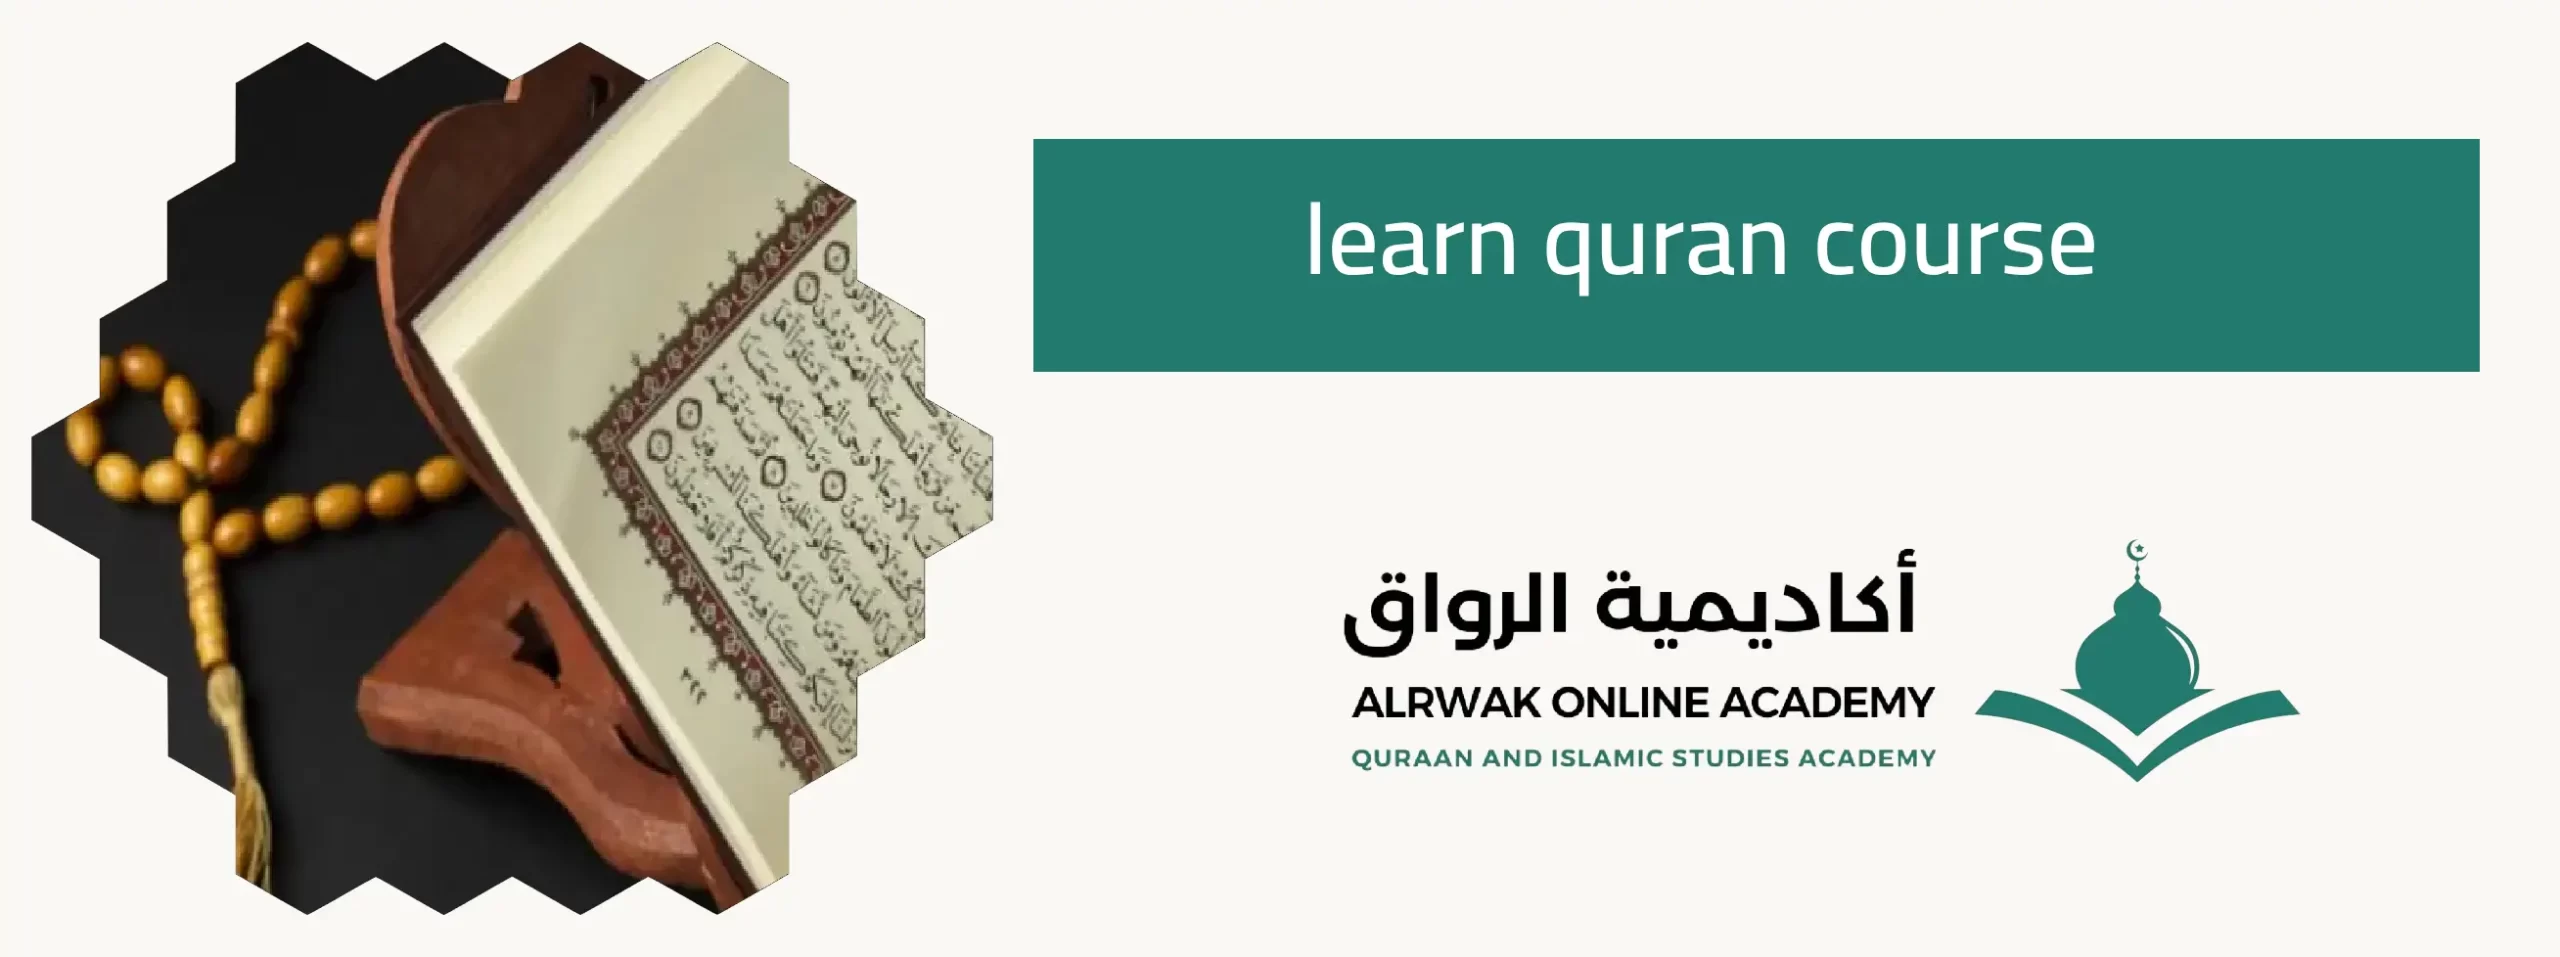 learn quran course